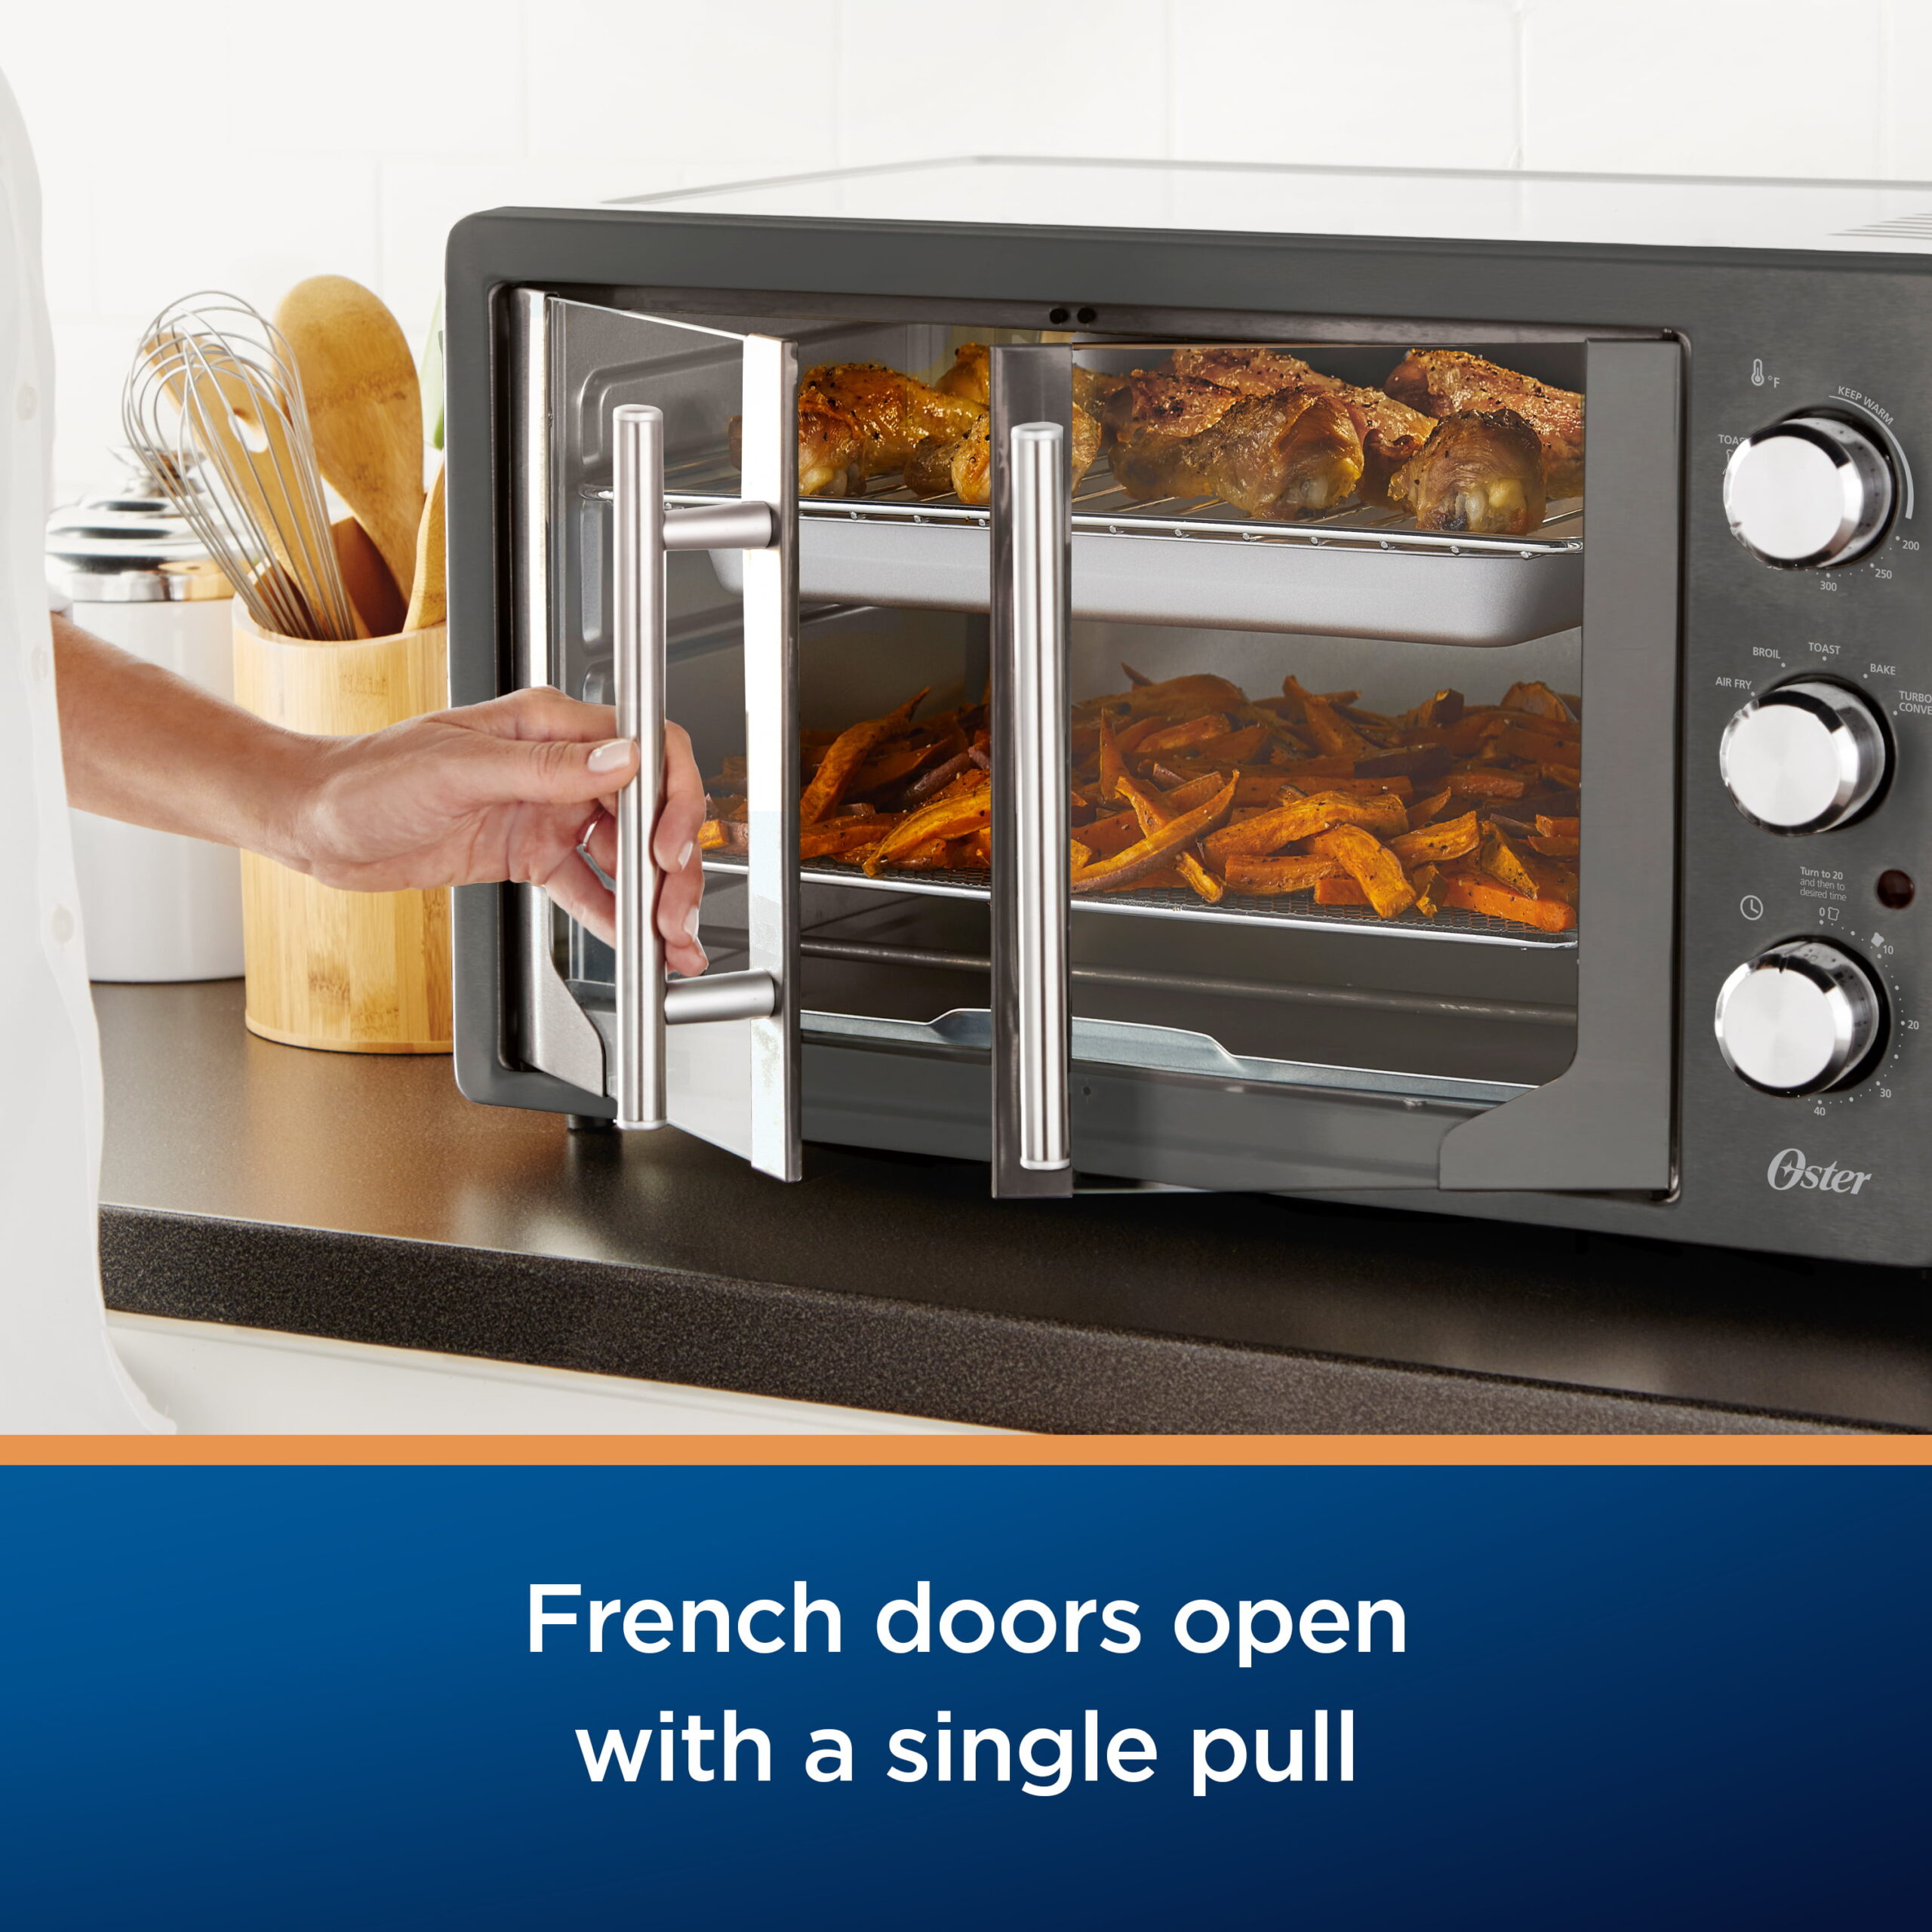 Double Door Oven with Rotisserie and Convection